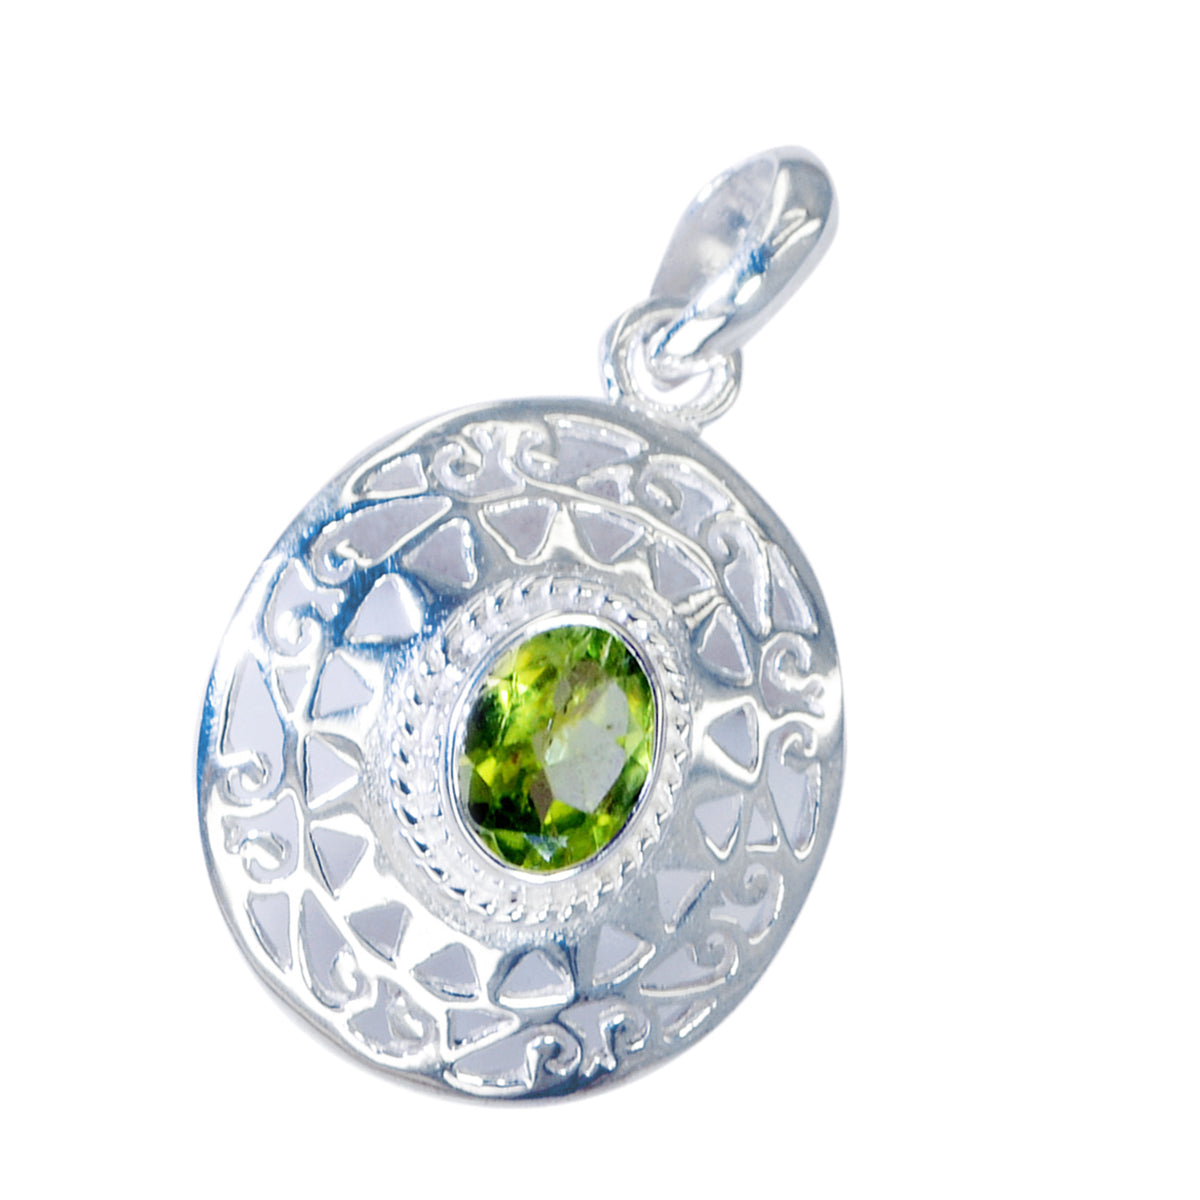 Riyo Handsome Gemstone Round Faceted Green Peridot Sterling Silver Pendant Gift For Friend